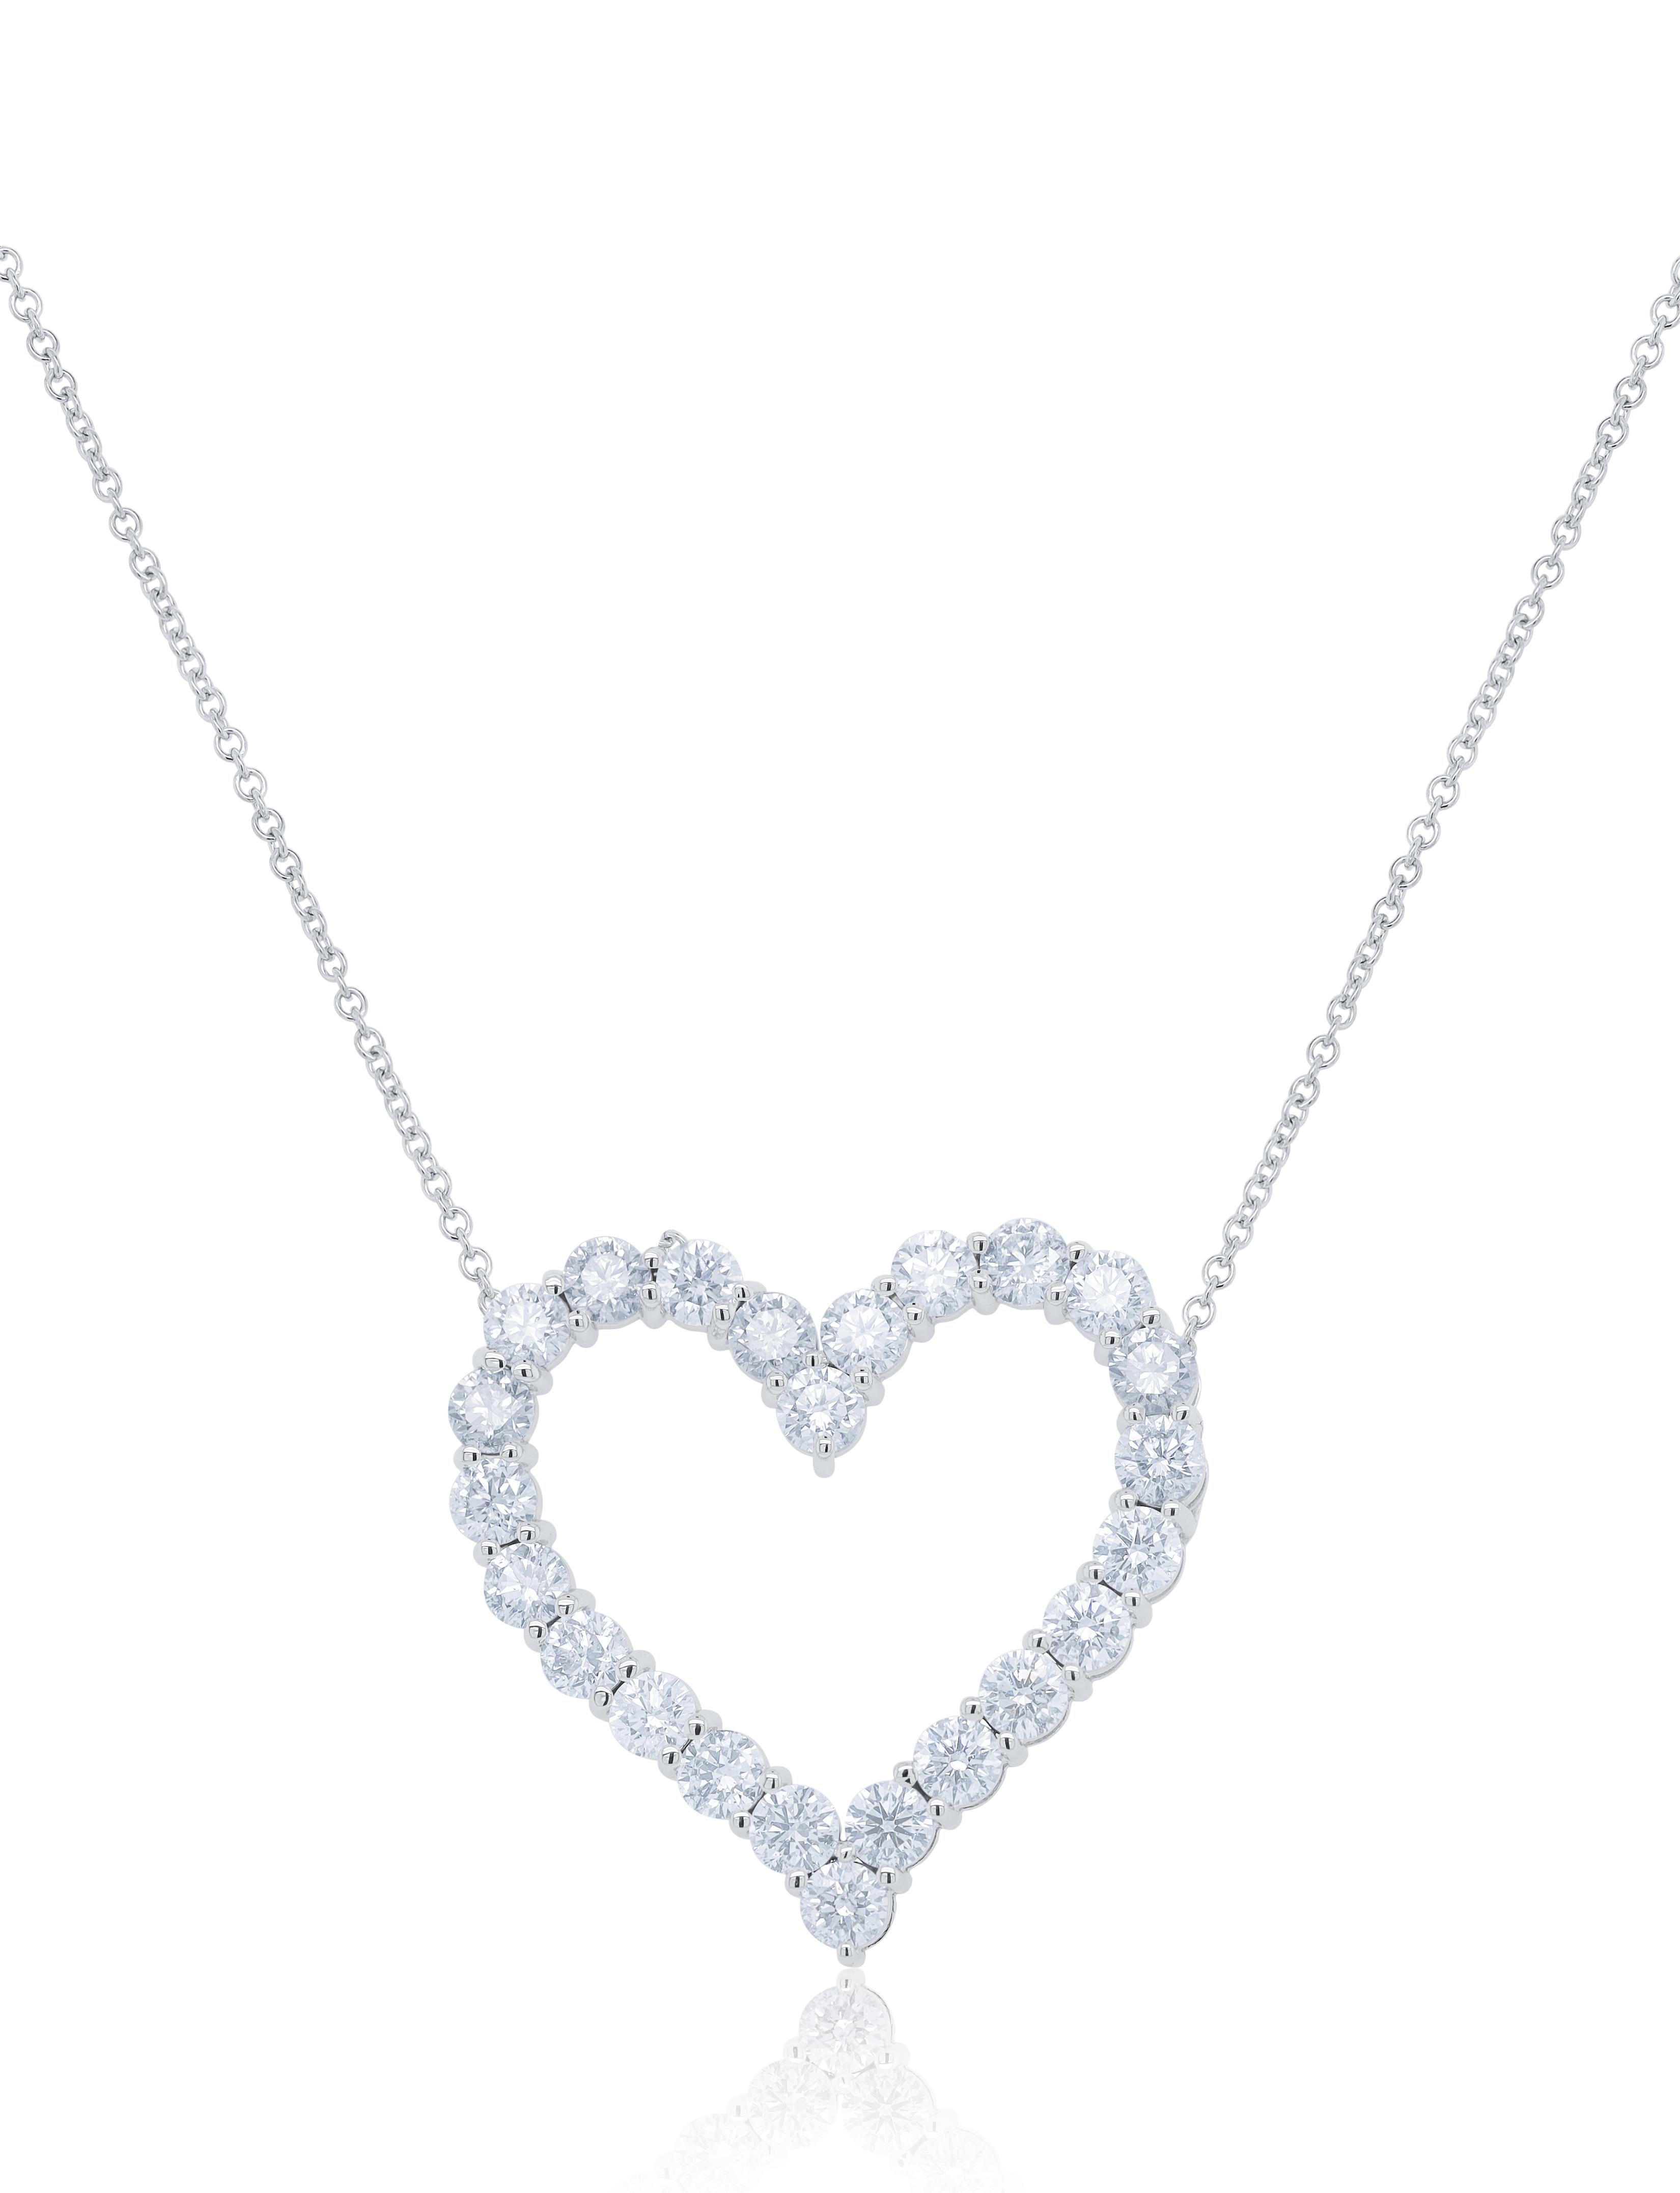 18kt white gold open heart pendant featuring 2.30 cts of round diamonds,24 stones 
Diana M. is a leading supplier of top-quality fine jewelry for over 35 years.
Diana M is one-stop shop for all your jewelry shopping, carrying line of diamond rings,